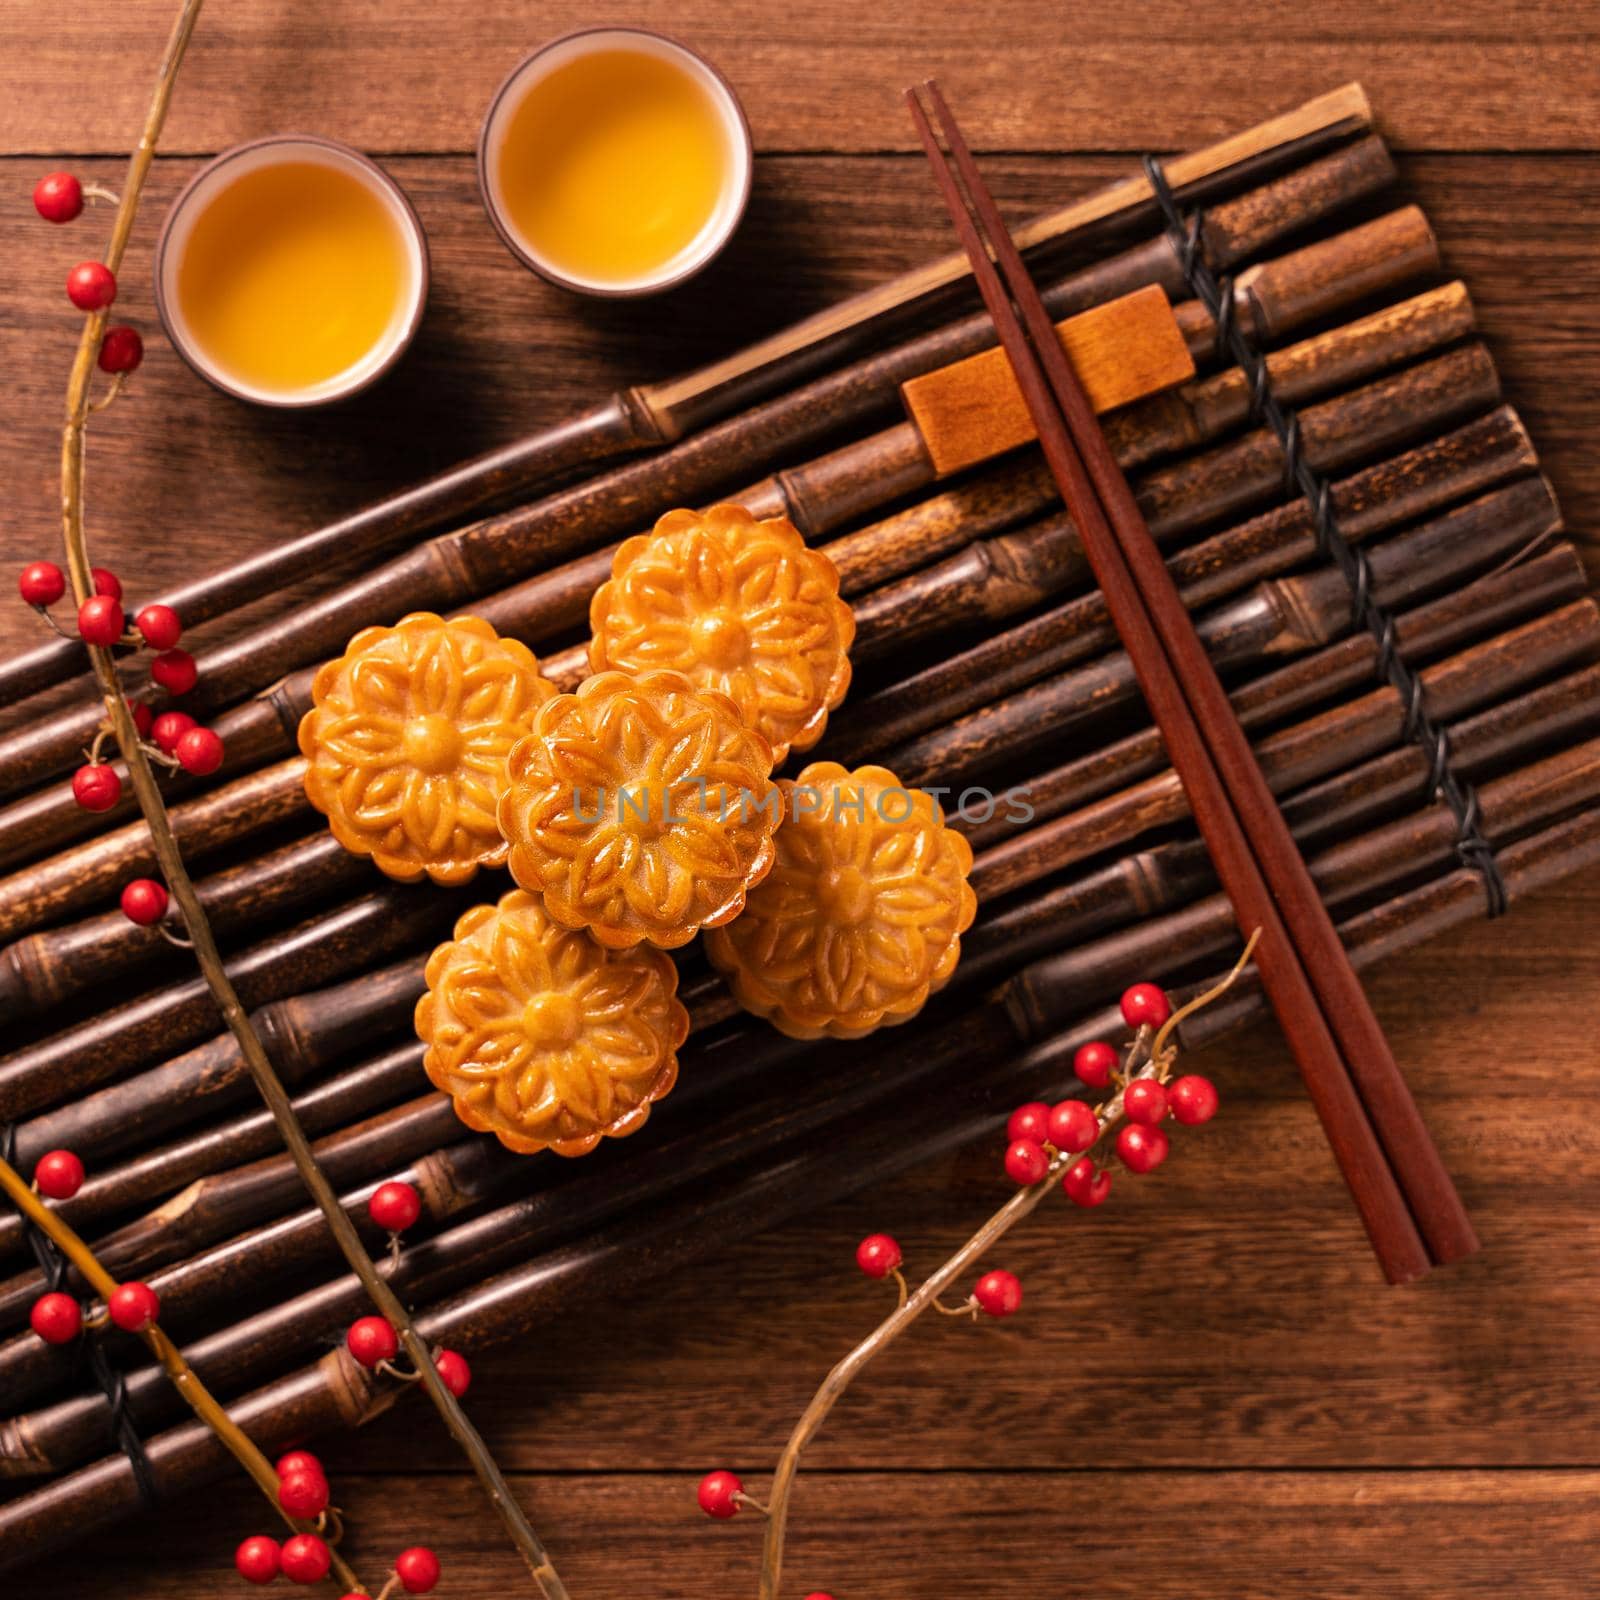 Chinese traditional pastry Moon cake Mooncake with tea cups on bamboo serving tray on wooden background for Mid-Autumn Festival, top view, flat lay.